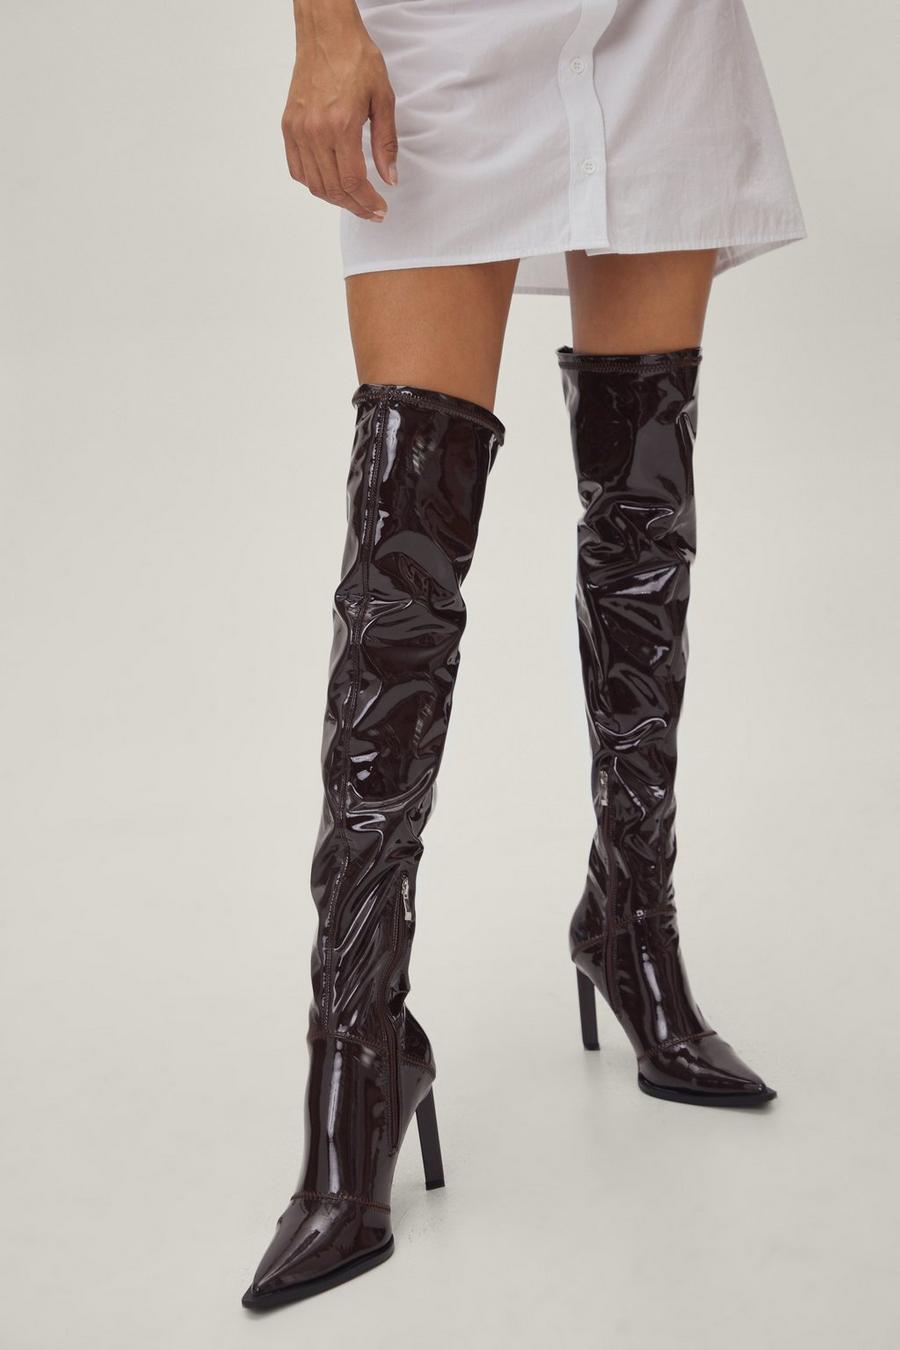 Patent Faux Leather Over the Knee Pointed Boots